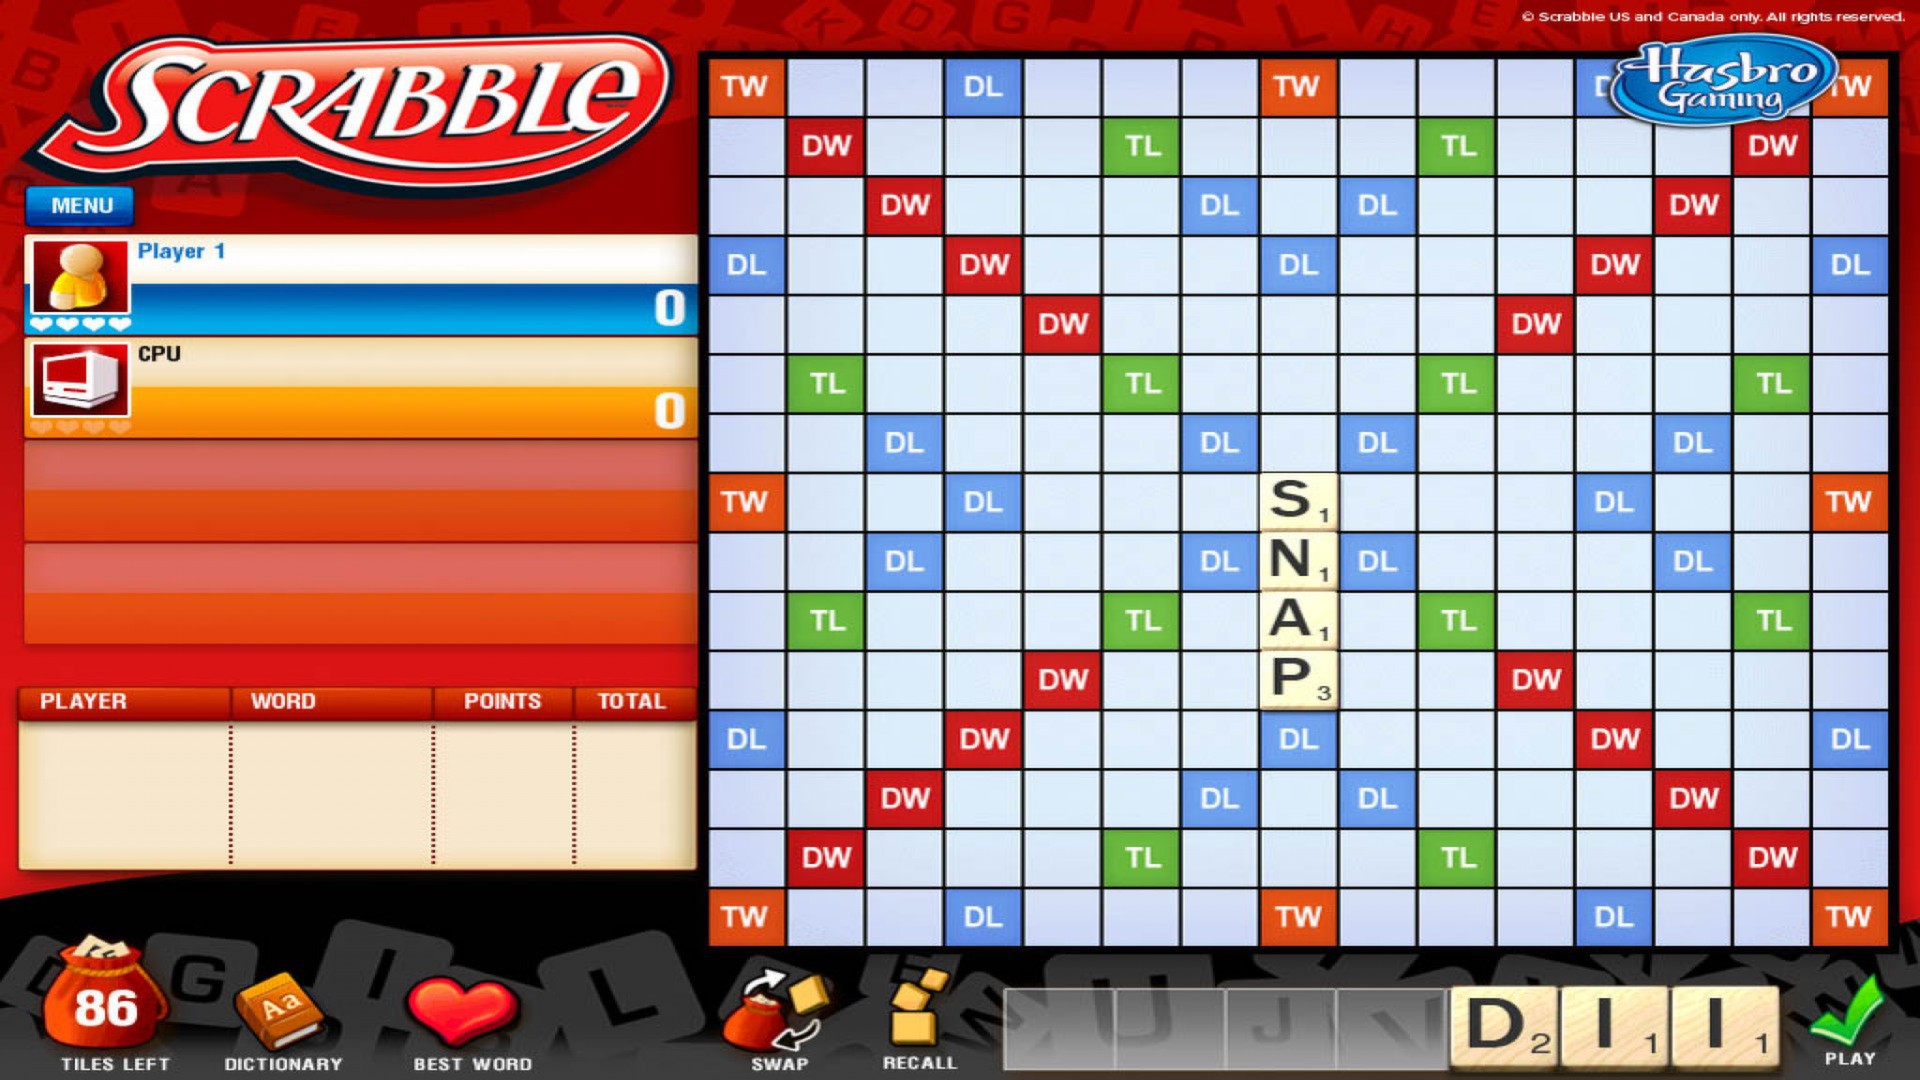 There are far more images available for Scrabble, but these are the ones we...